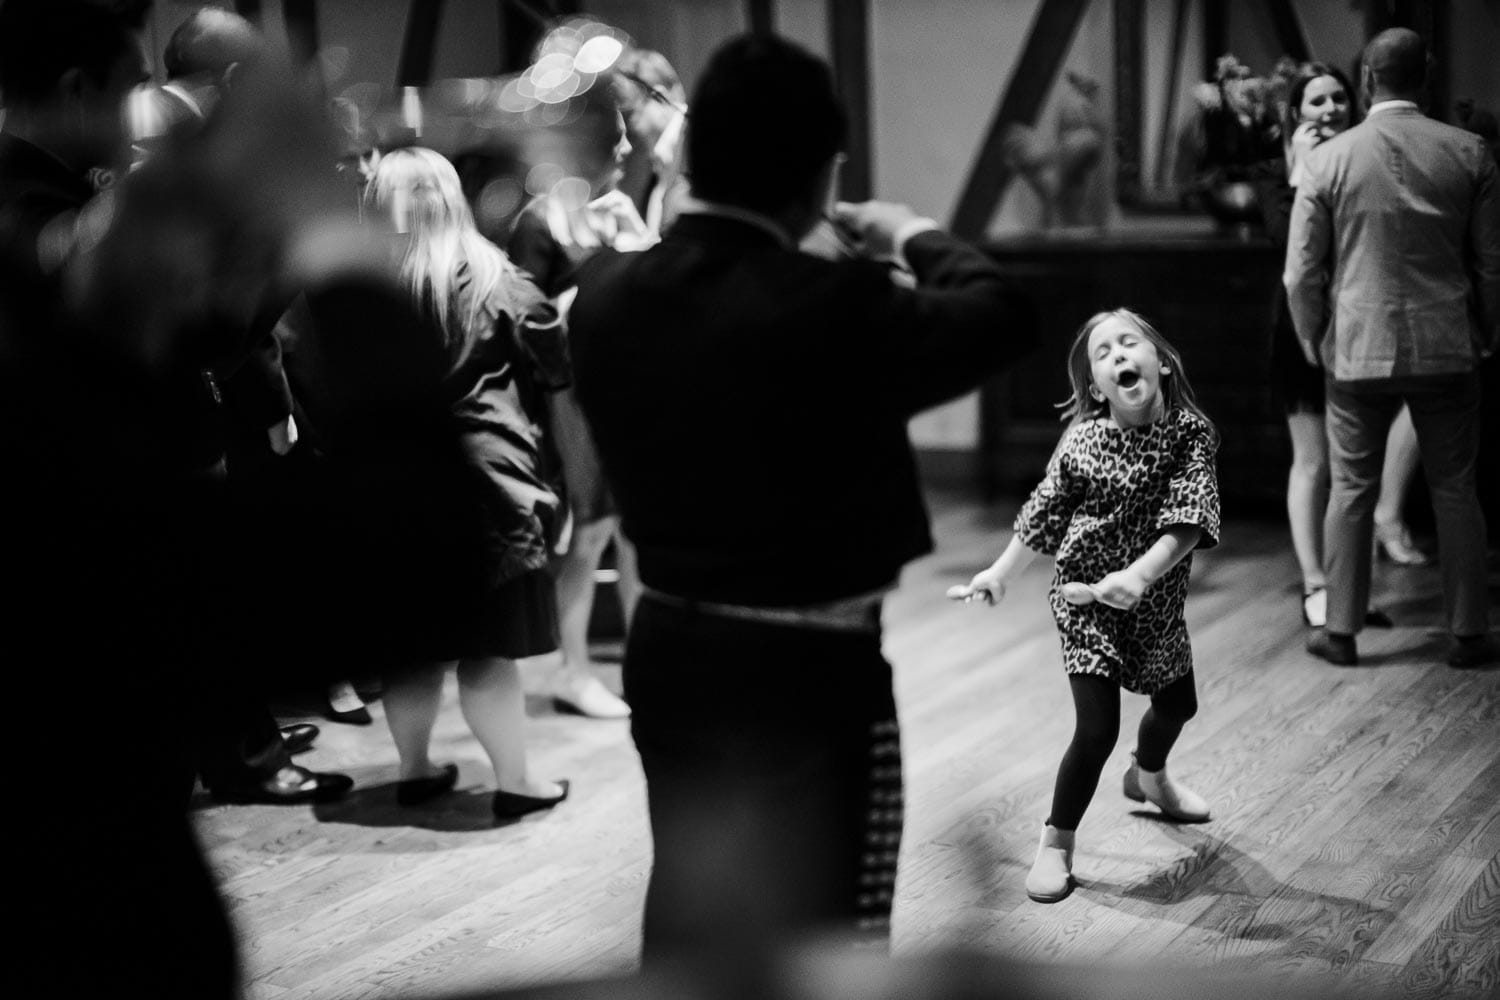 Little girl danced as mariachis play during the welcome dinner at Club Giraud